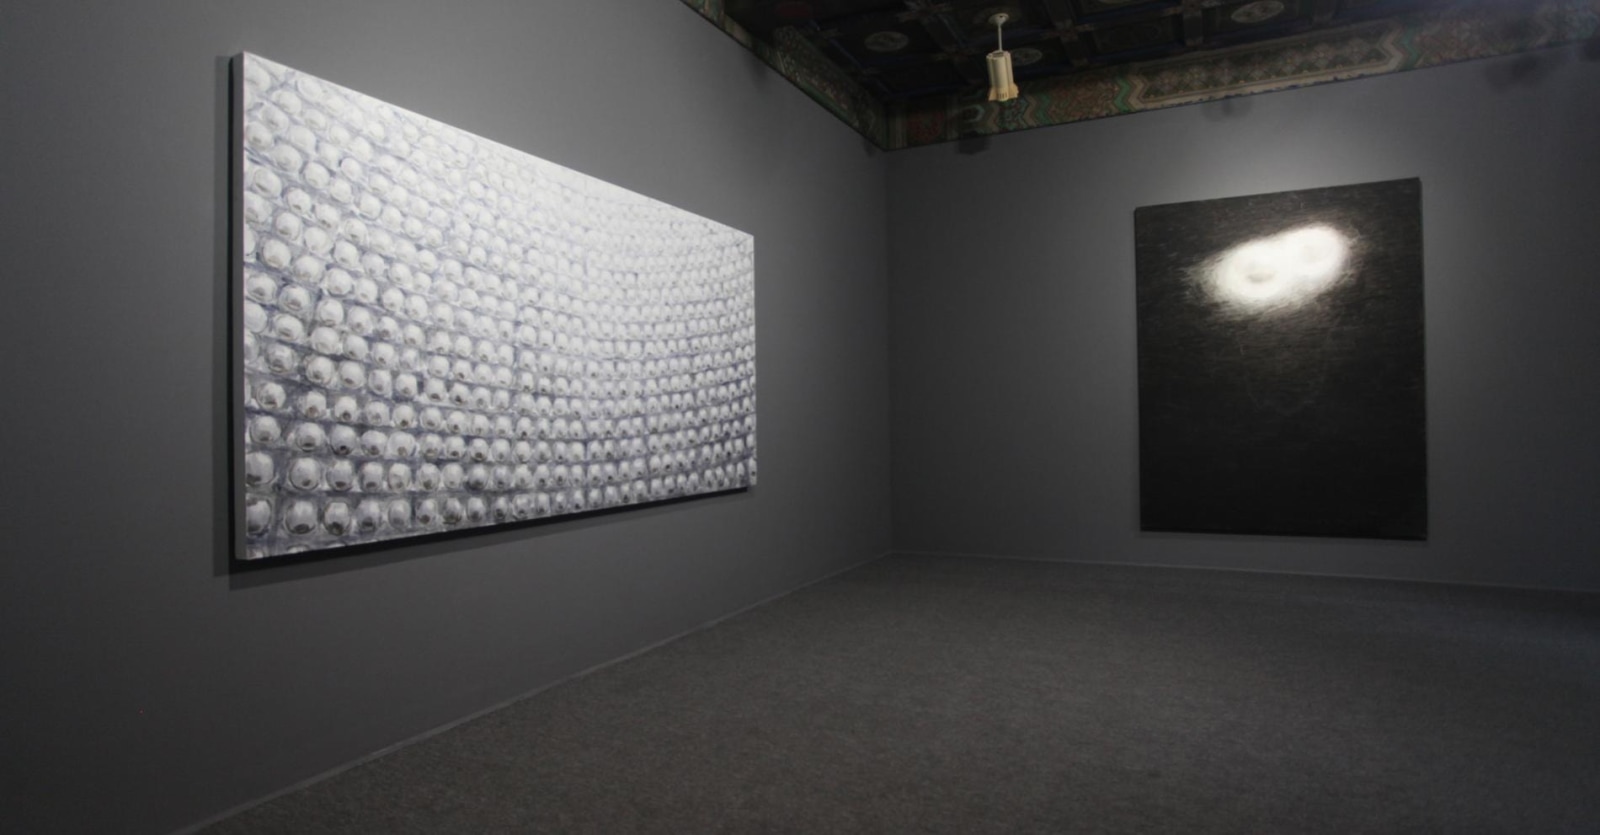 SHI ZHIYING - I Don't Pretend to Understand the Universe - Exhibitions ...